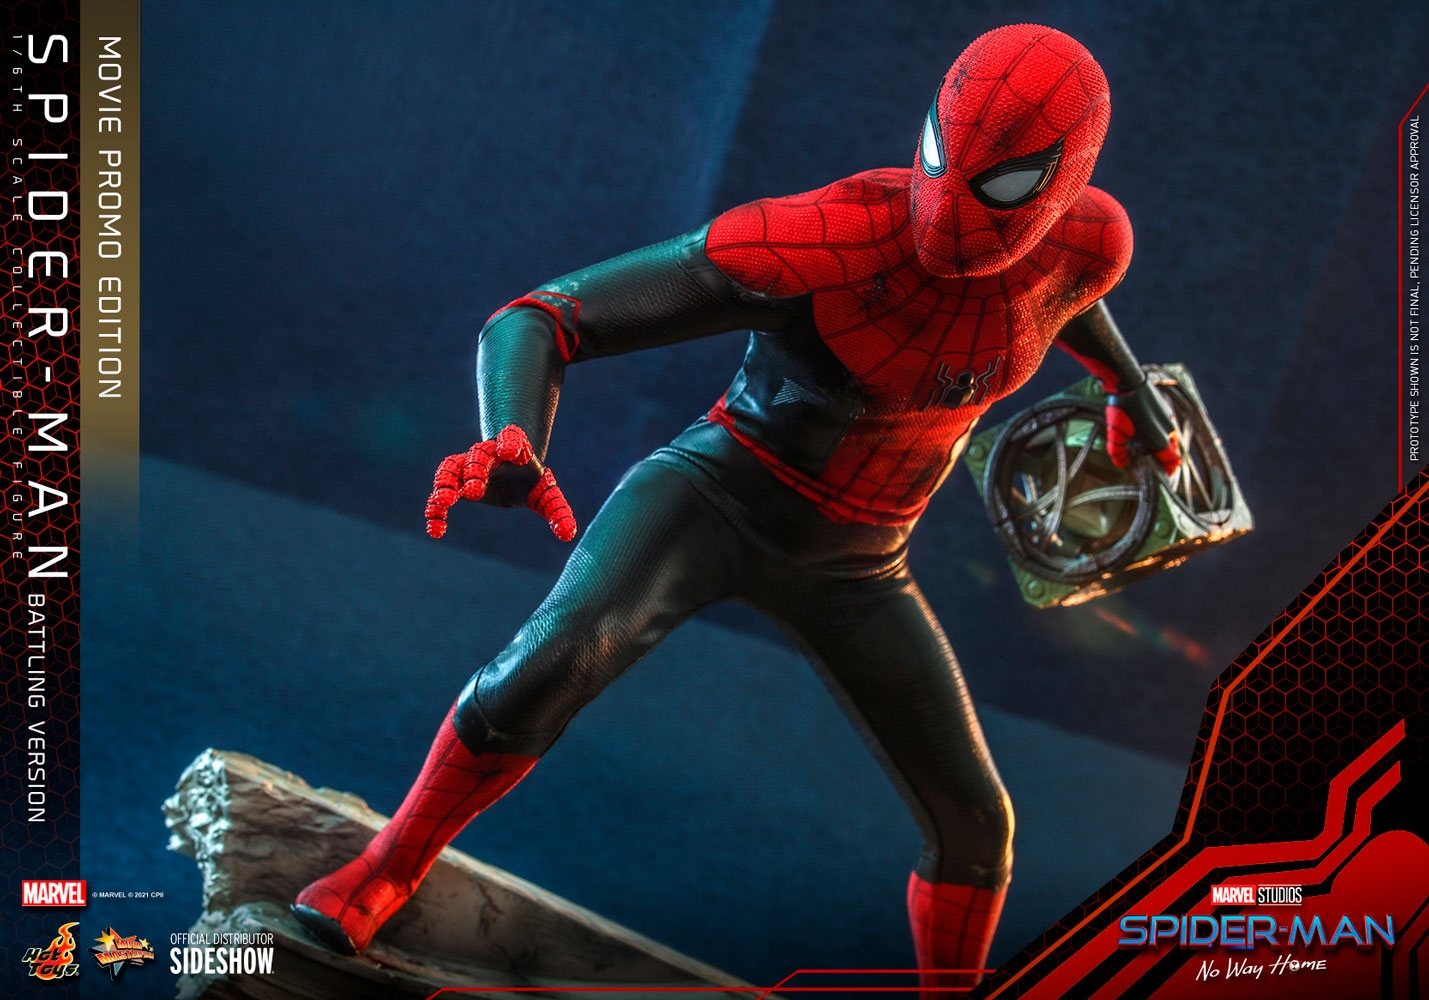 spider-man-movie-promo-edition-sixth-scale-figure-by-hot-toys_marvel_gallery_61a51d979b6b7.jpg